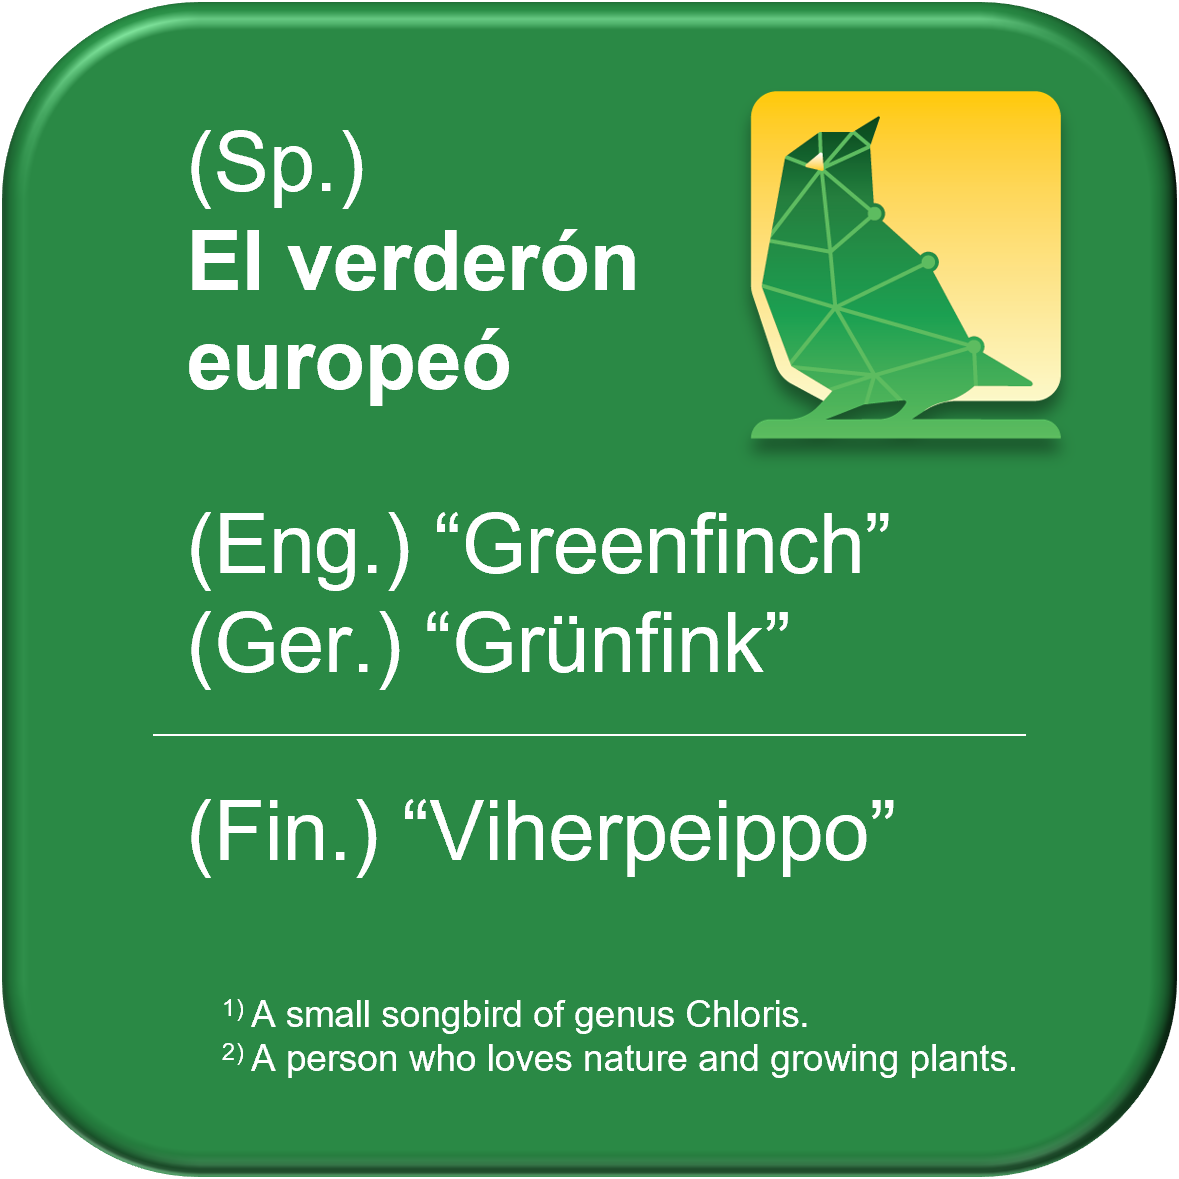 Verderon meaning